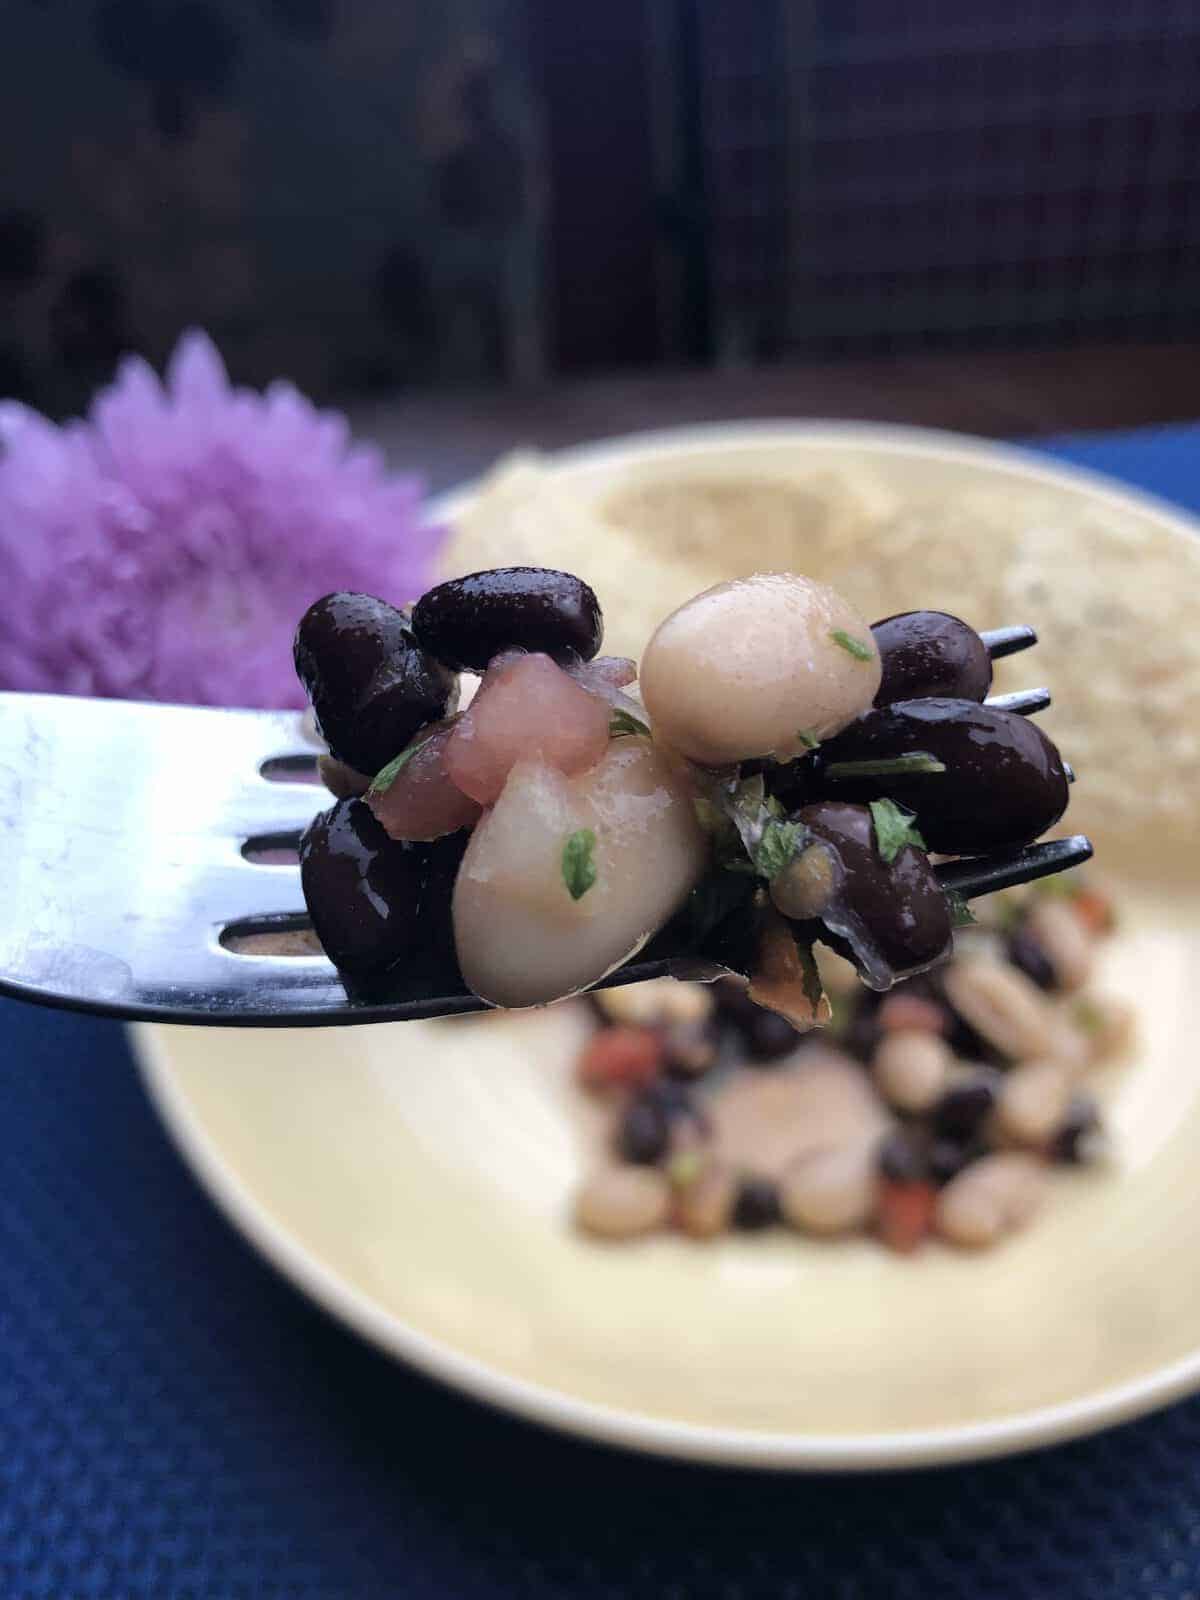  Bean salad on a fork over a bowl of bean salad with a purple flower